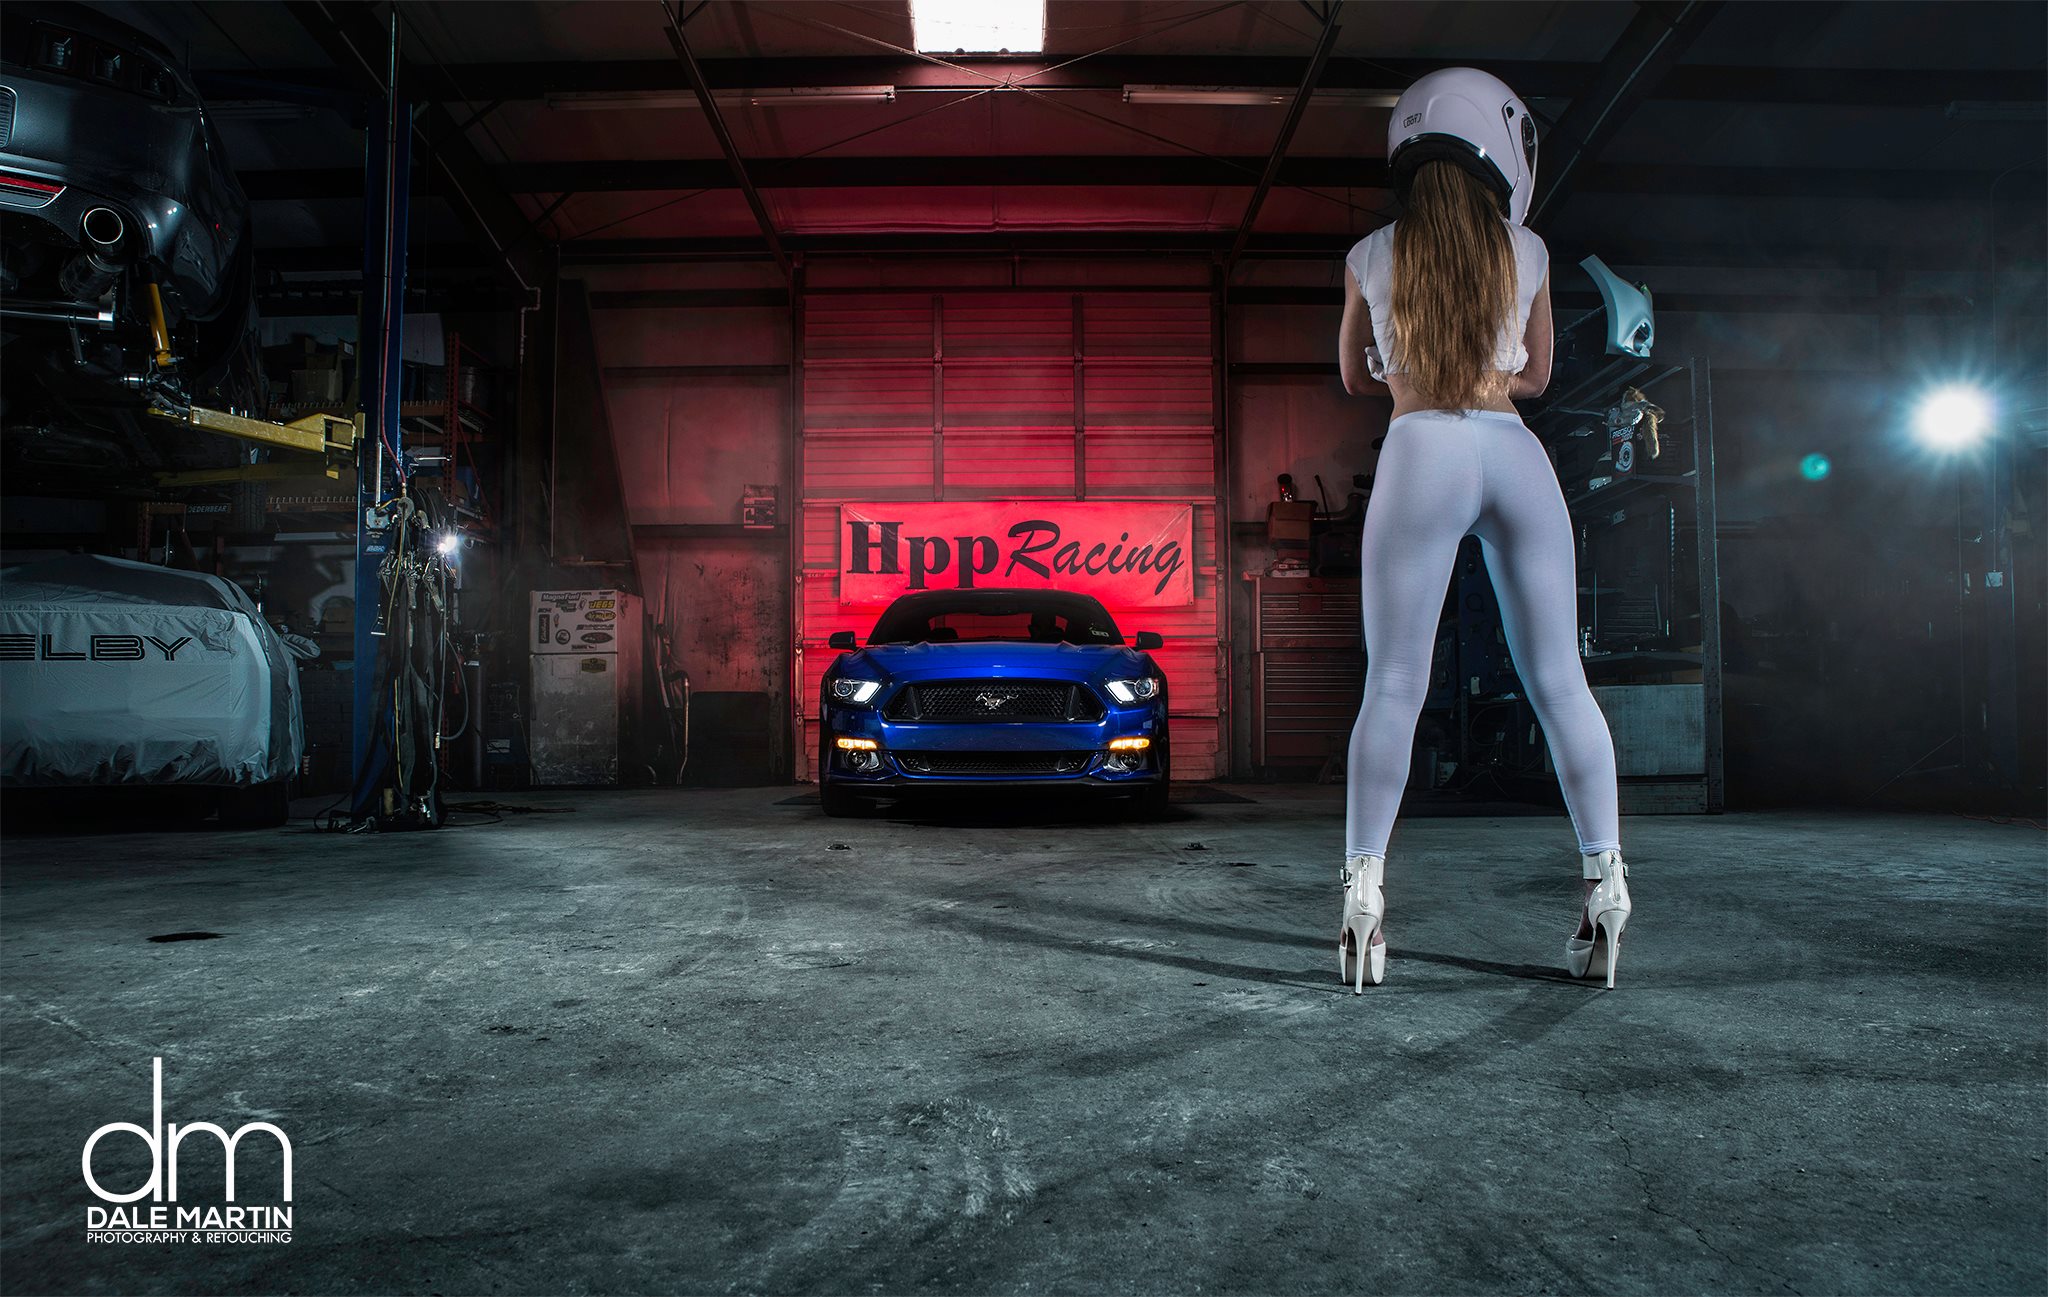 The Stig's Wife Checks Out a 2015 Ford Mustang - autoevolution